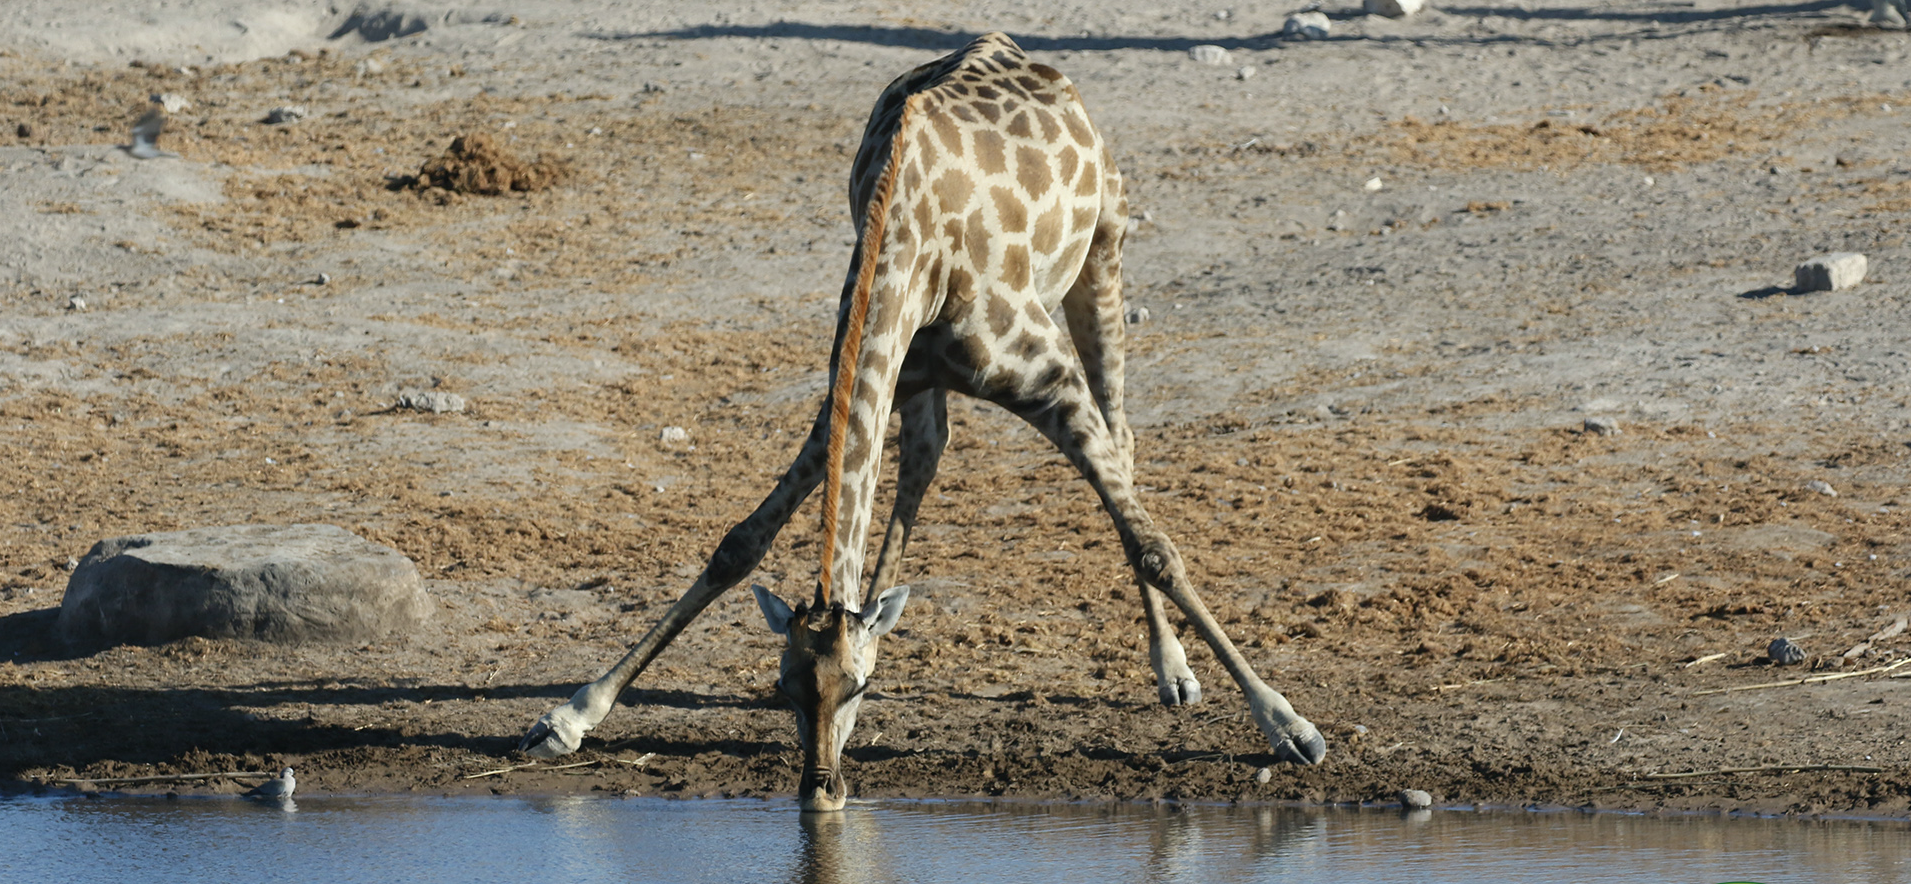 Did you know that drinking is dangerous for a giraffe? | Exploring Africa